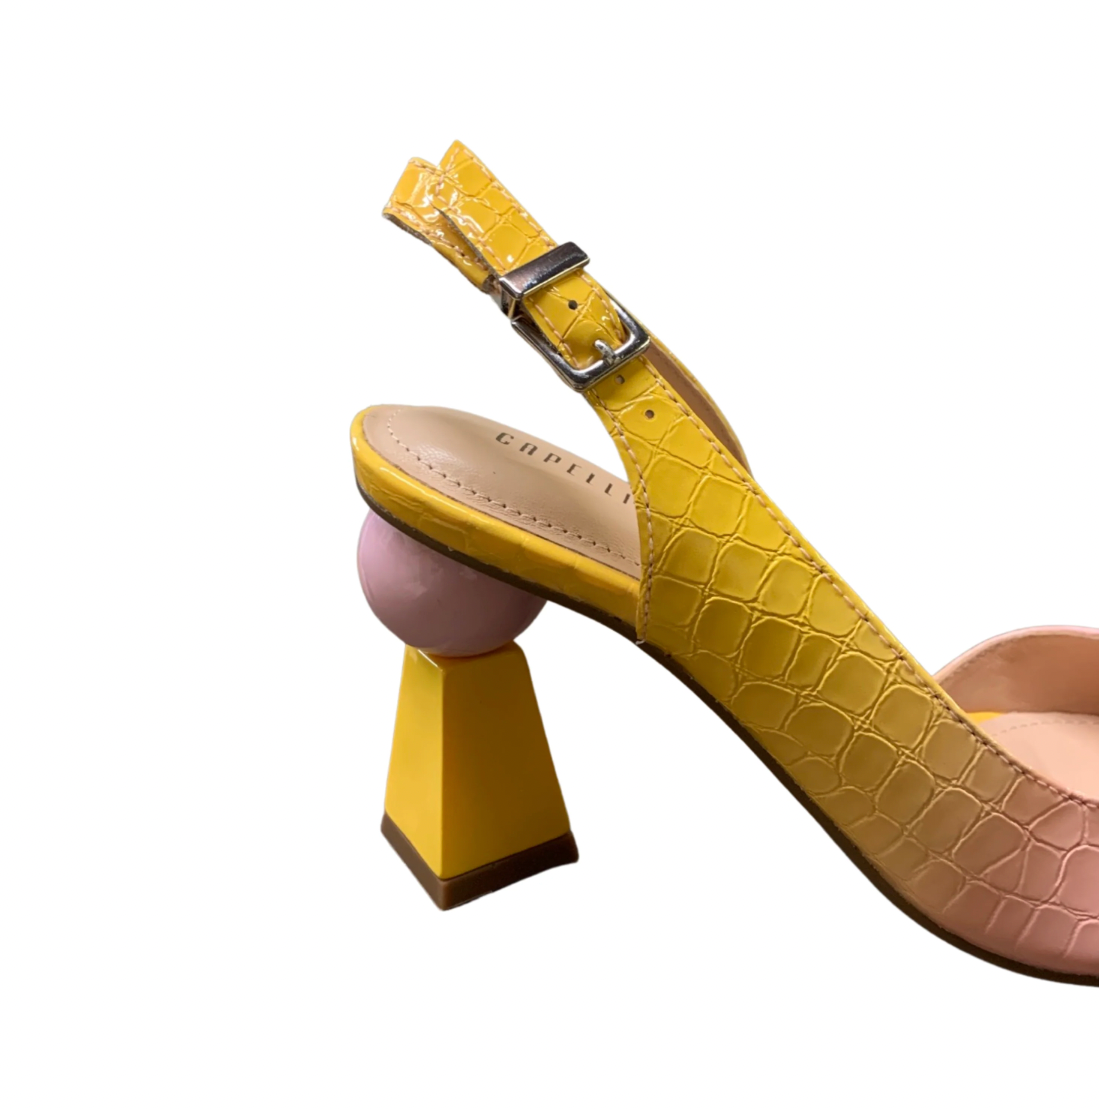 Capelli rossi "Ava" Pink and yellow degrade sling back leather dress sandal